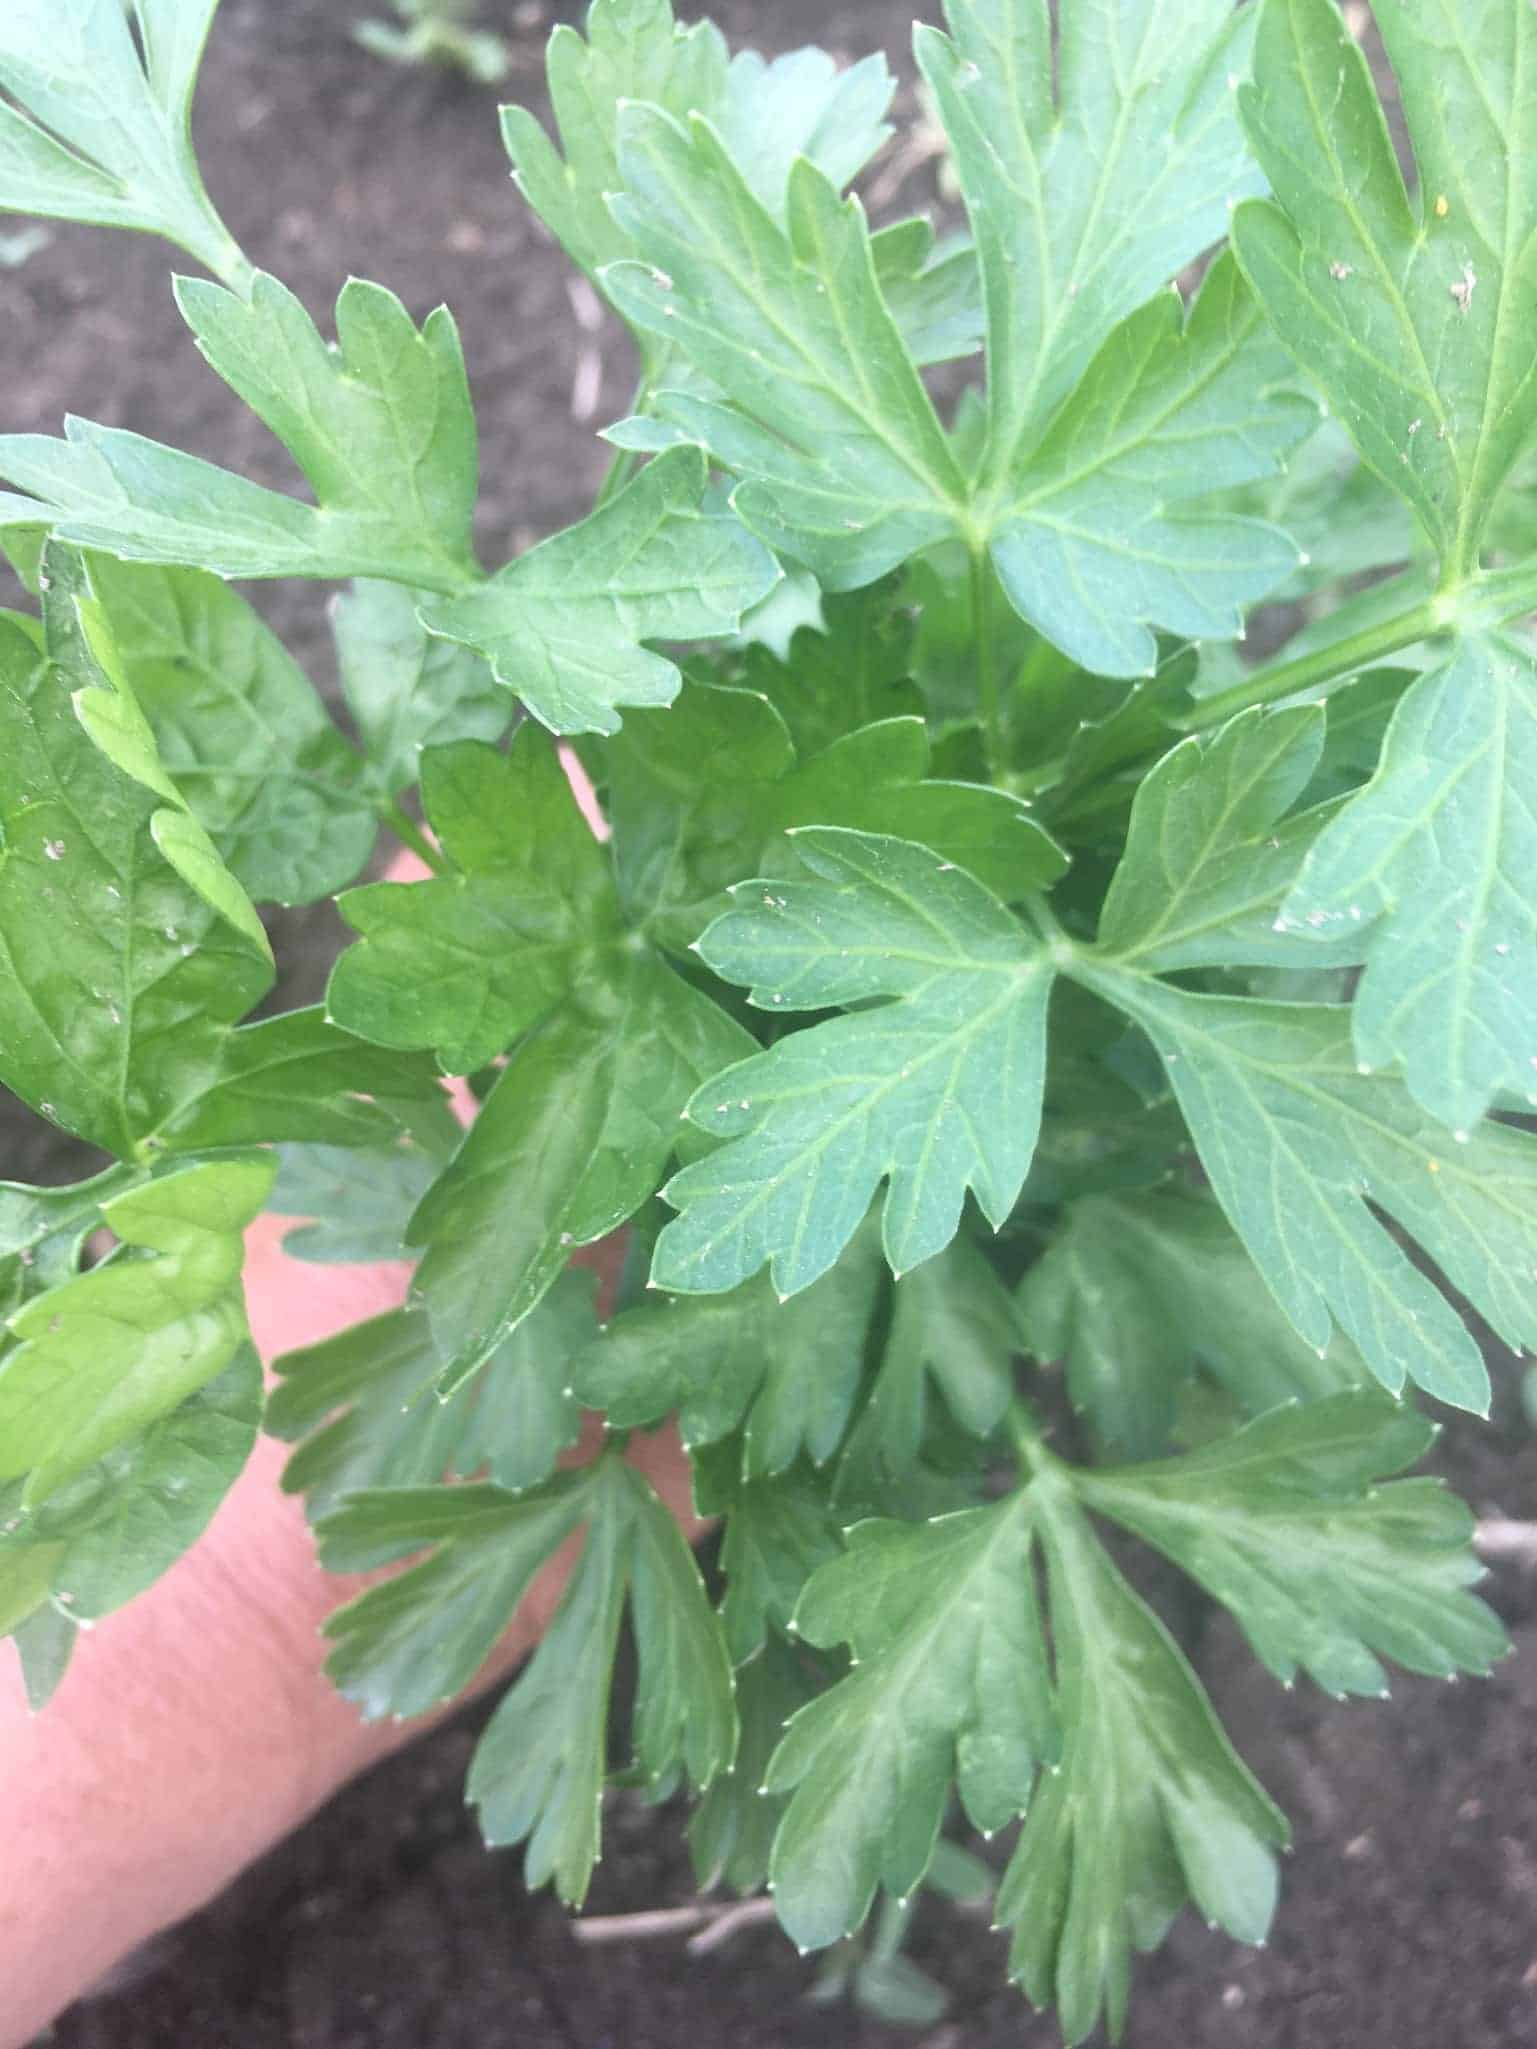 Parsley - August Showers Bring a Great Big Sigh of Relief